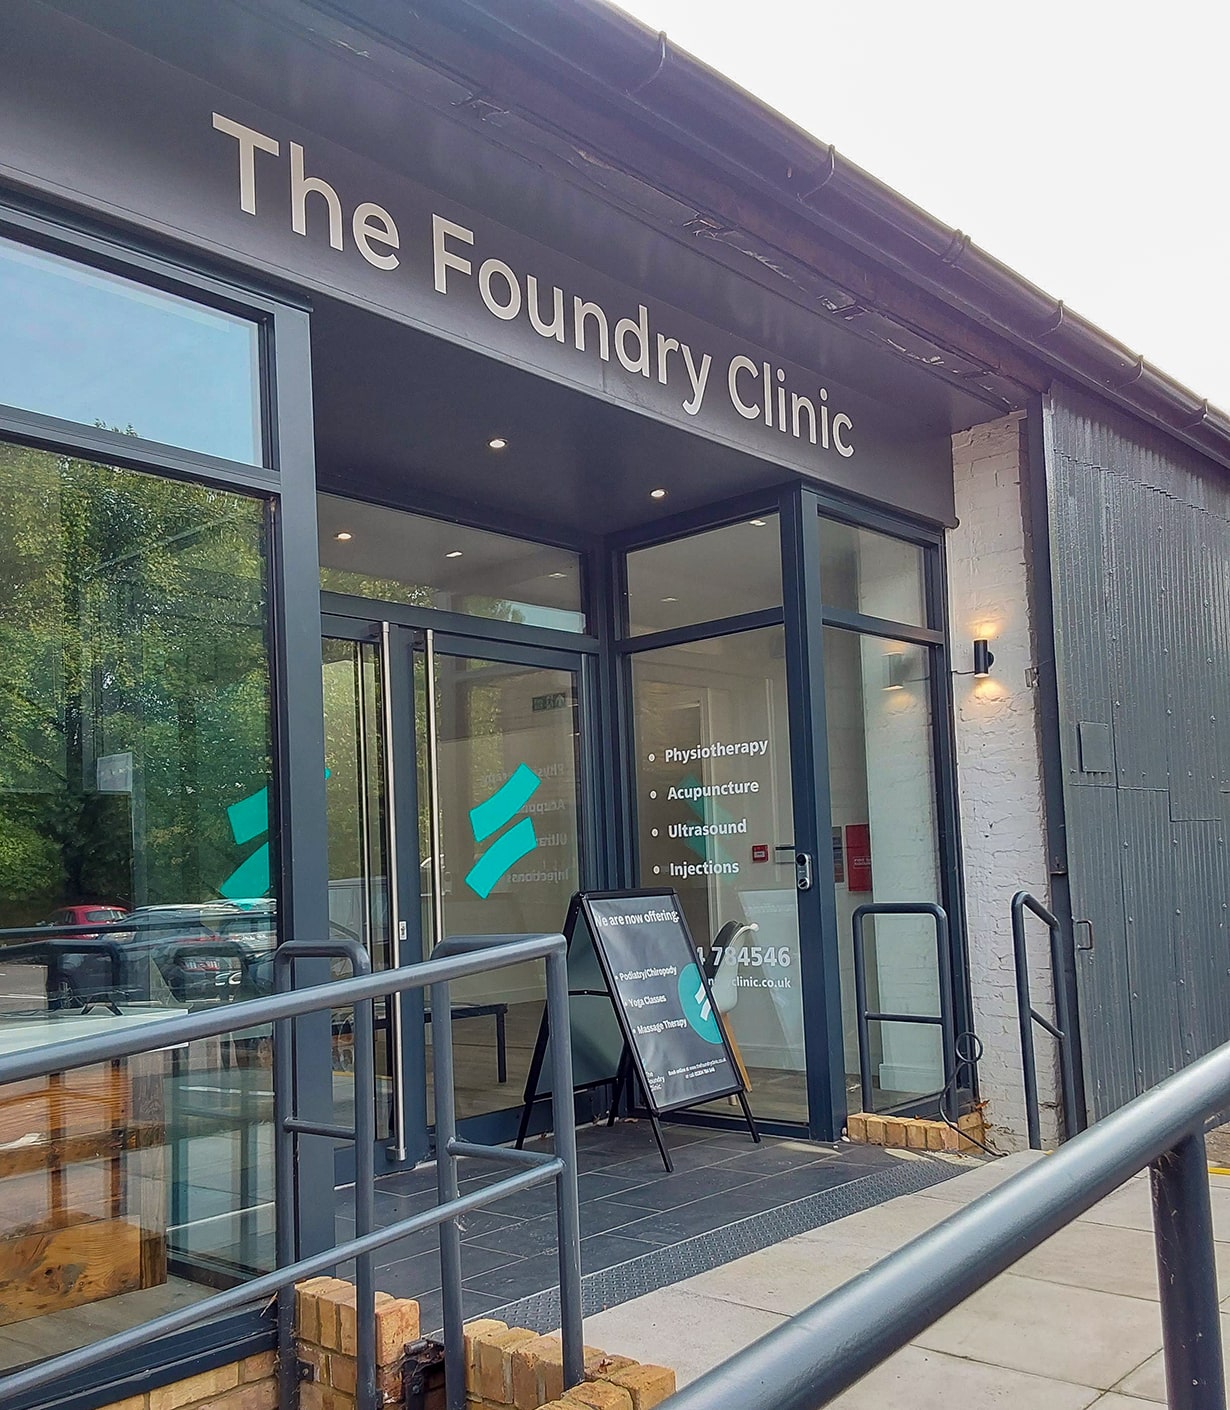 The Foundry Clinic, Sandwich